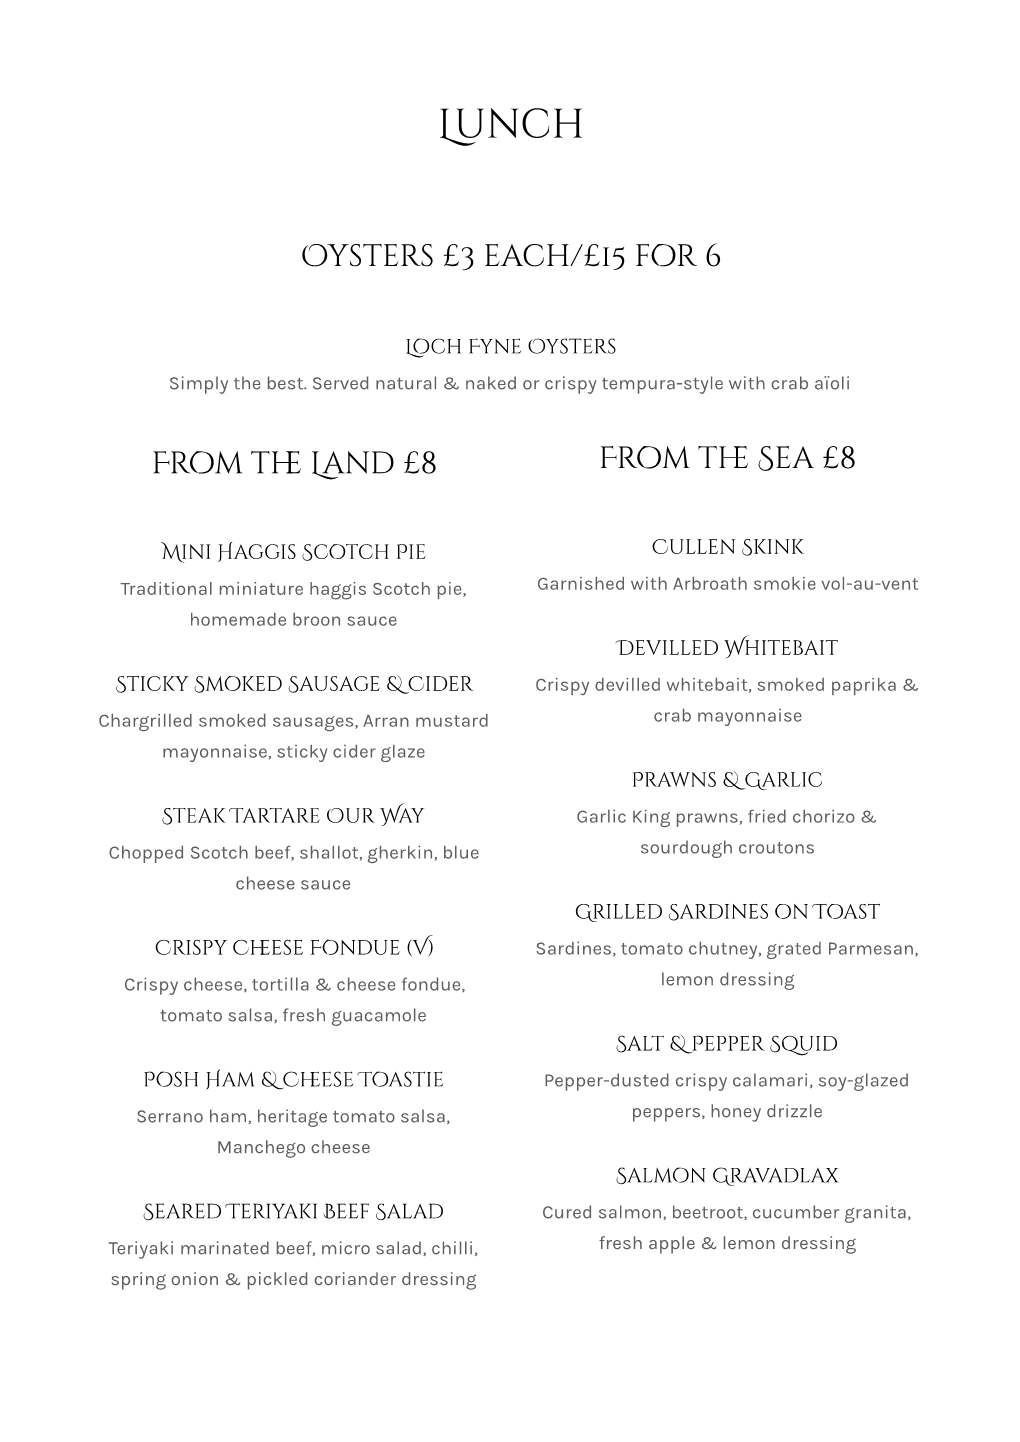 Oysters £3 Each/£15 for 6 from the Land £8 from the Sea £8